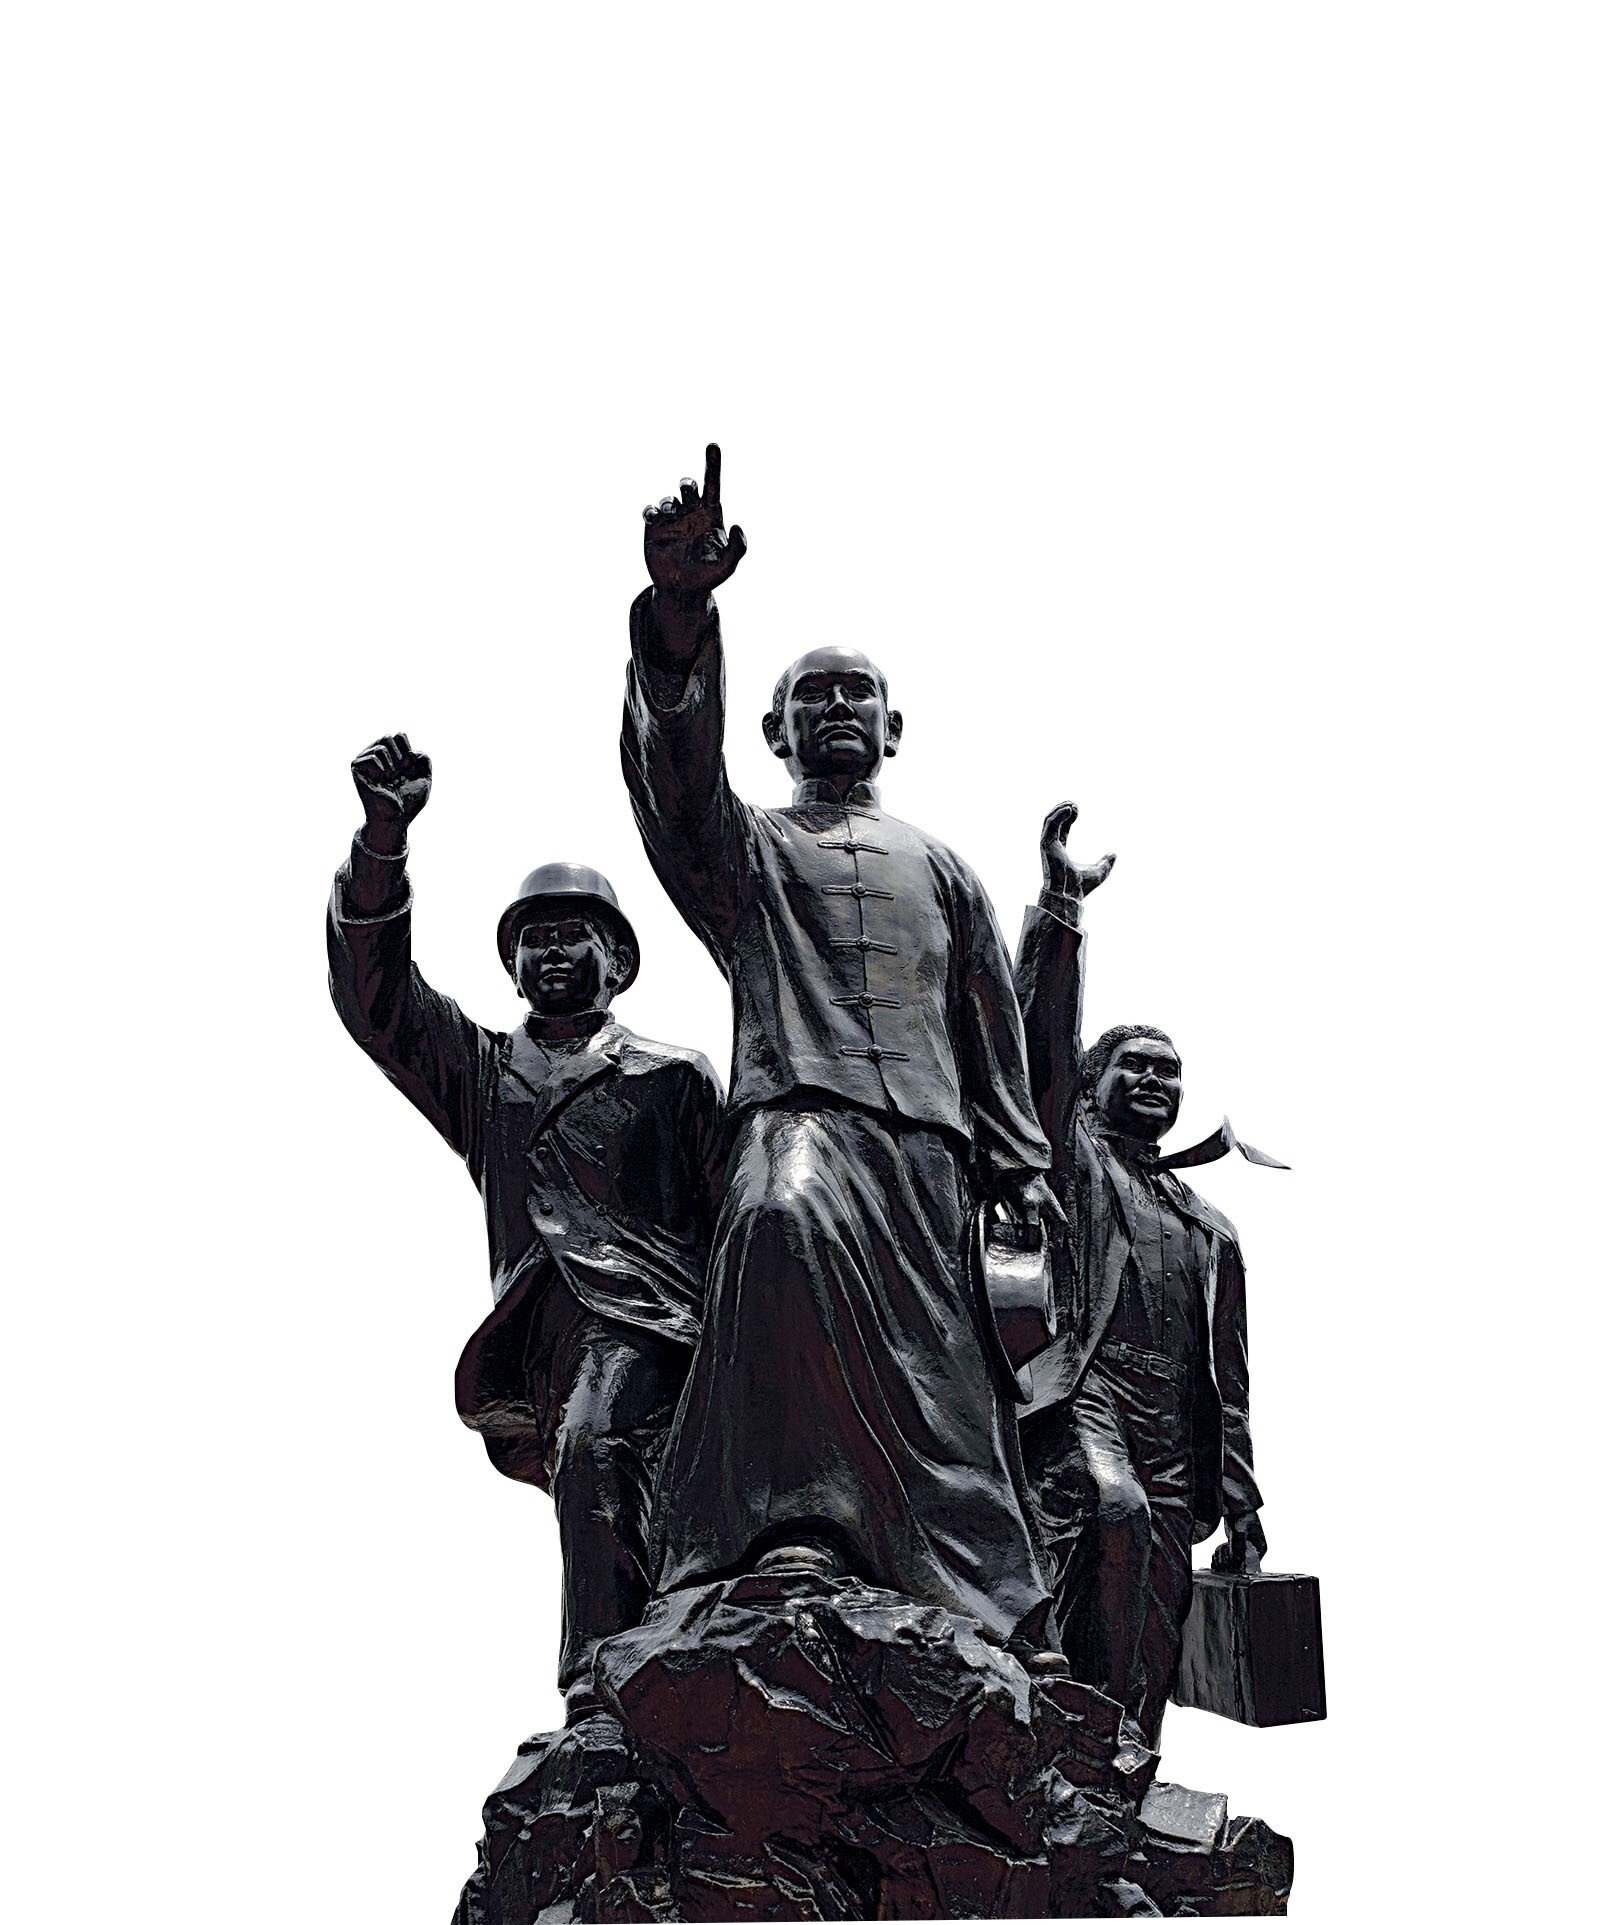 The Three Patriots statue in George Town. Sun Yat-sen leads the charge, accompanied by staunch supporters Goh Say Eng and Ooi Kim Kheng. Photo: Shutterstock